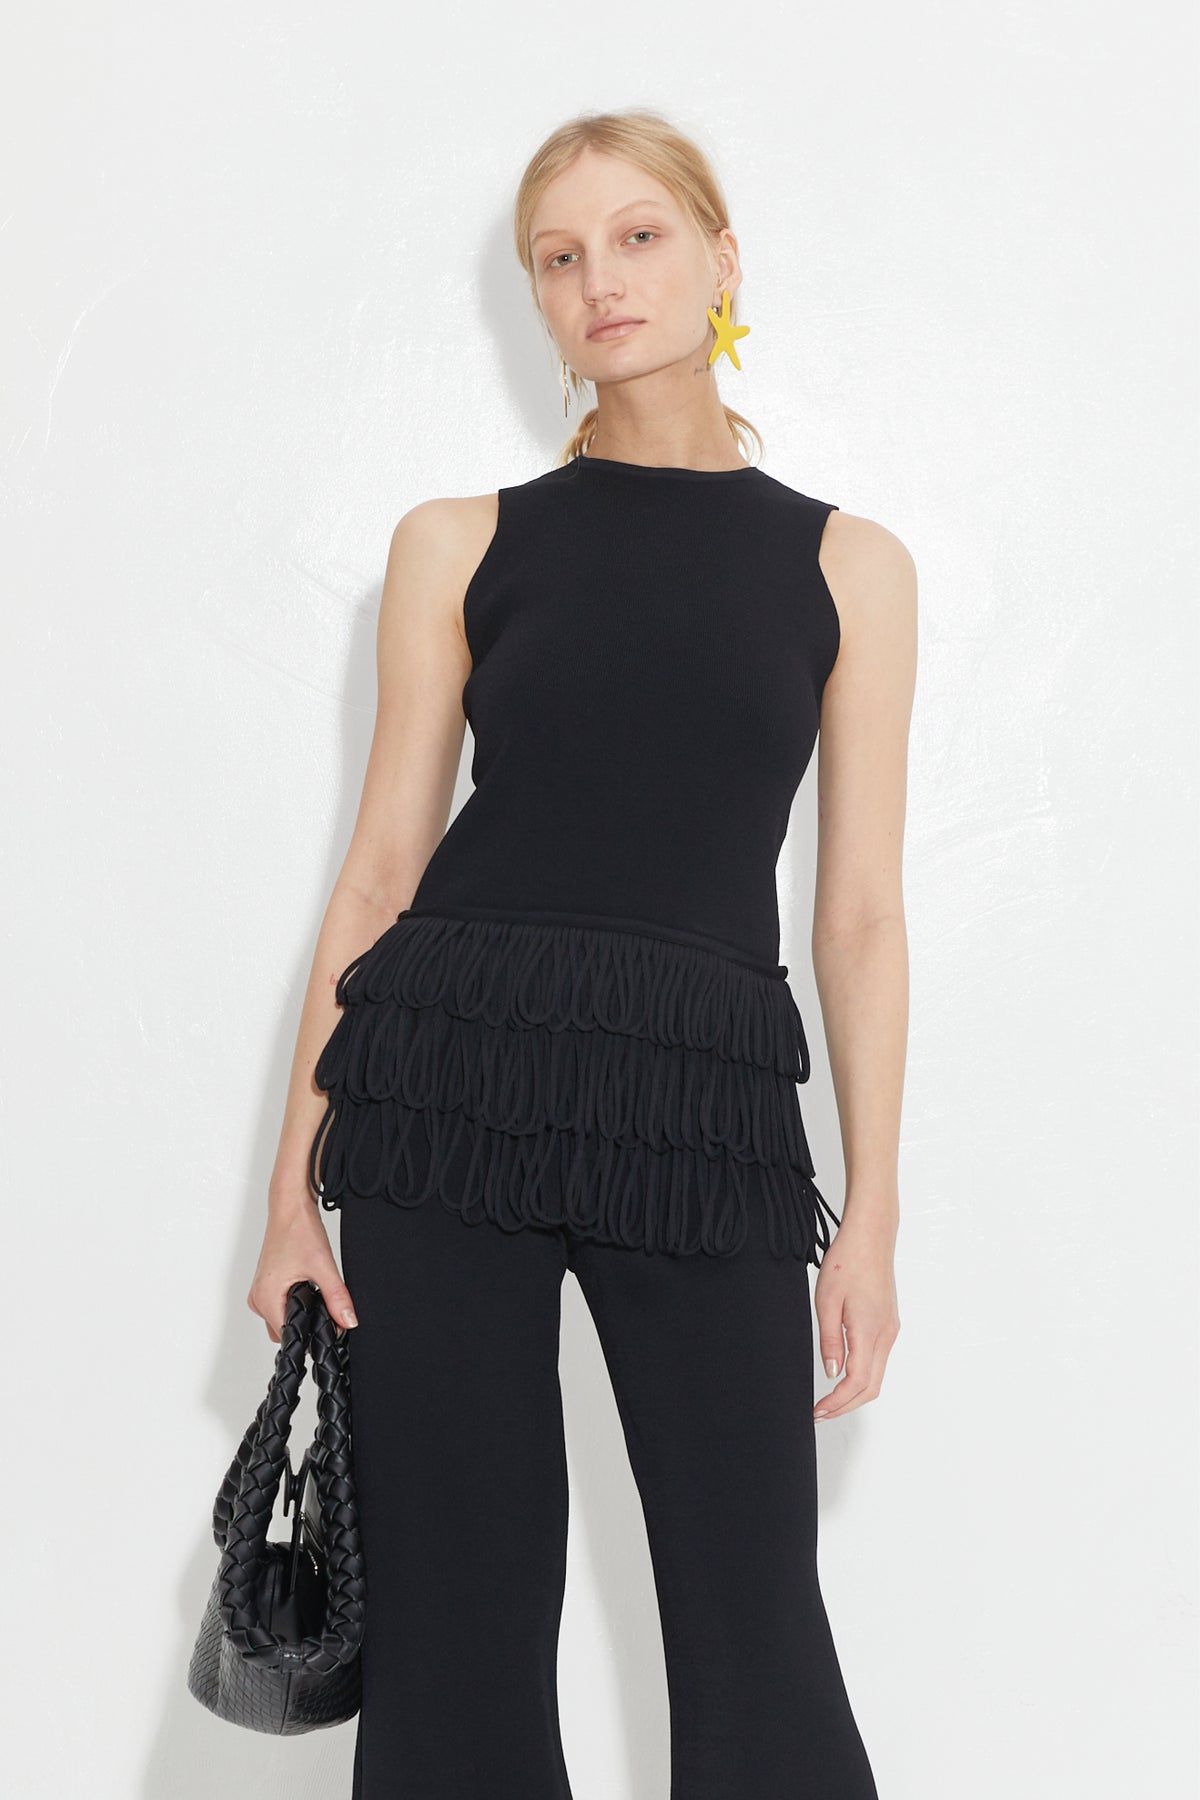 Knits By Hartland Top in Black